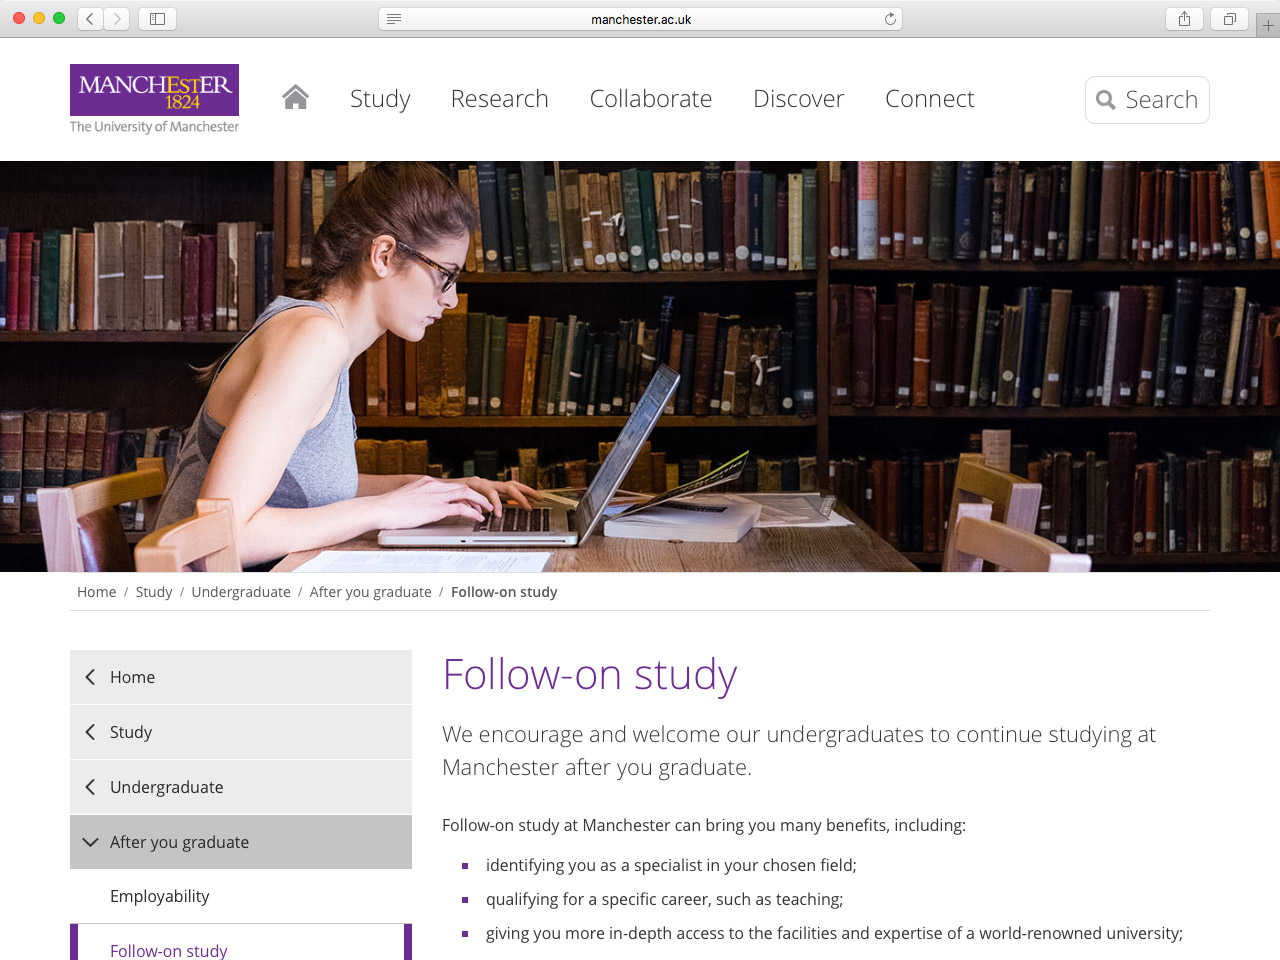 A real-world example of breadcrumbs on the University of Manchester website